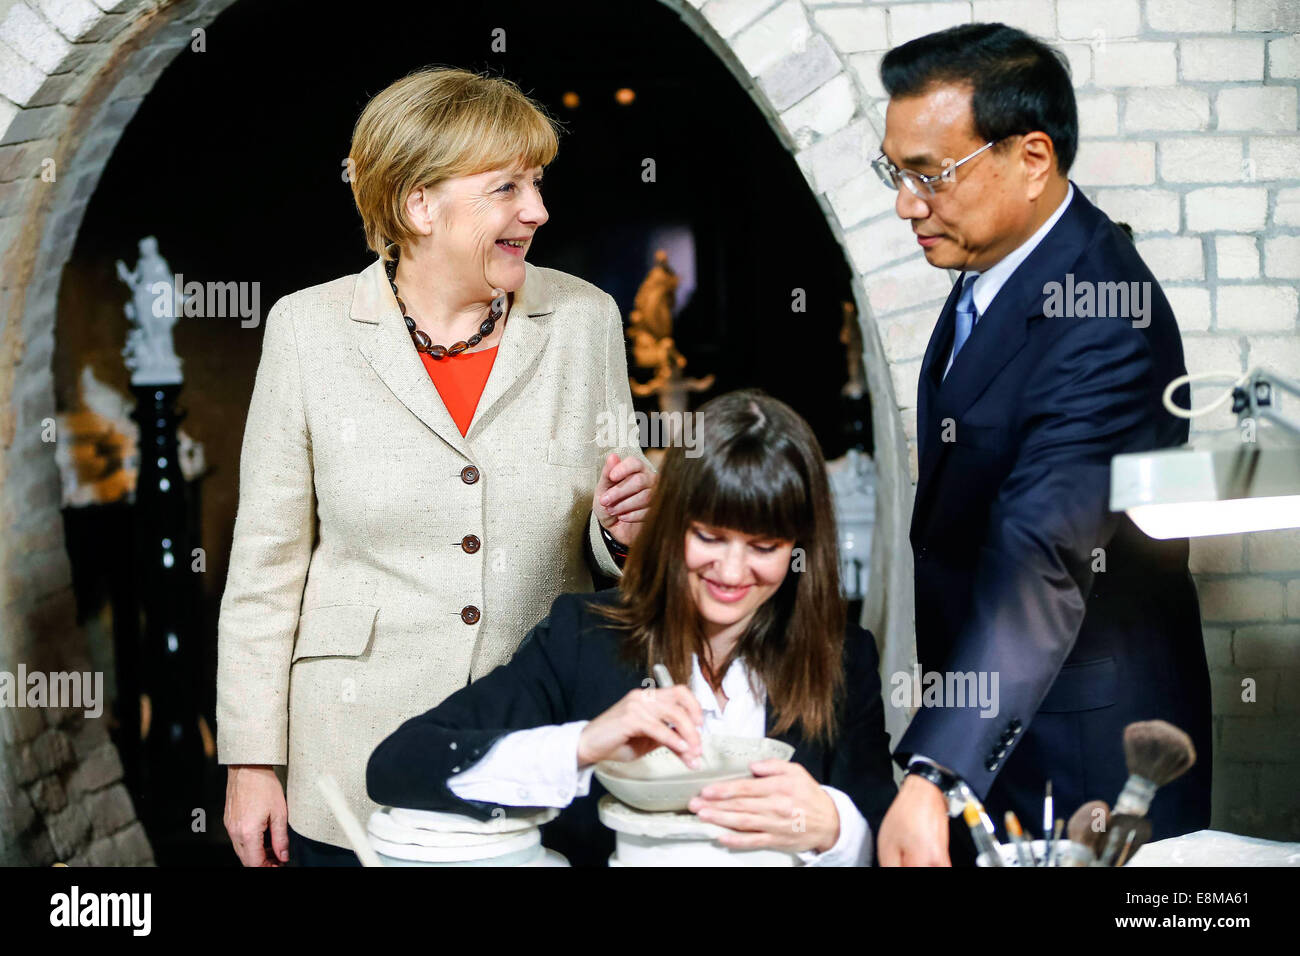 Berlin, Germany. 10th October, 2014. Germany's Chancellor Angela Merkel (L) and China's Premier Li Keqiang (R) visit the Royal Porcelain Factory KPM (Koenigliche Porzellan-Manufaktur) in Berlin October 10, 2014. Credit:  dpa picture alliance/Alamy Live News Stock Photo